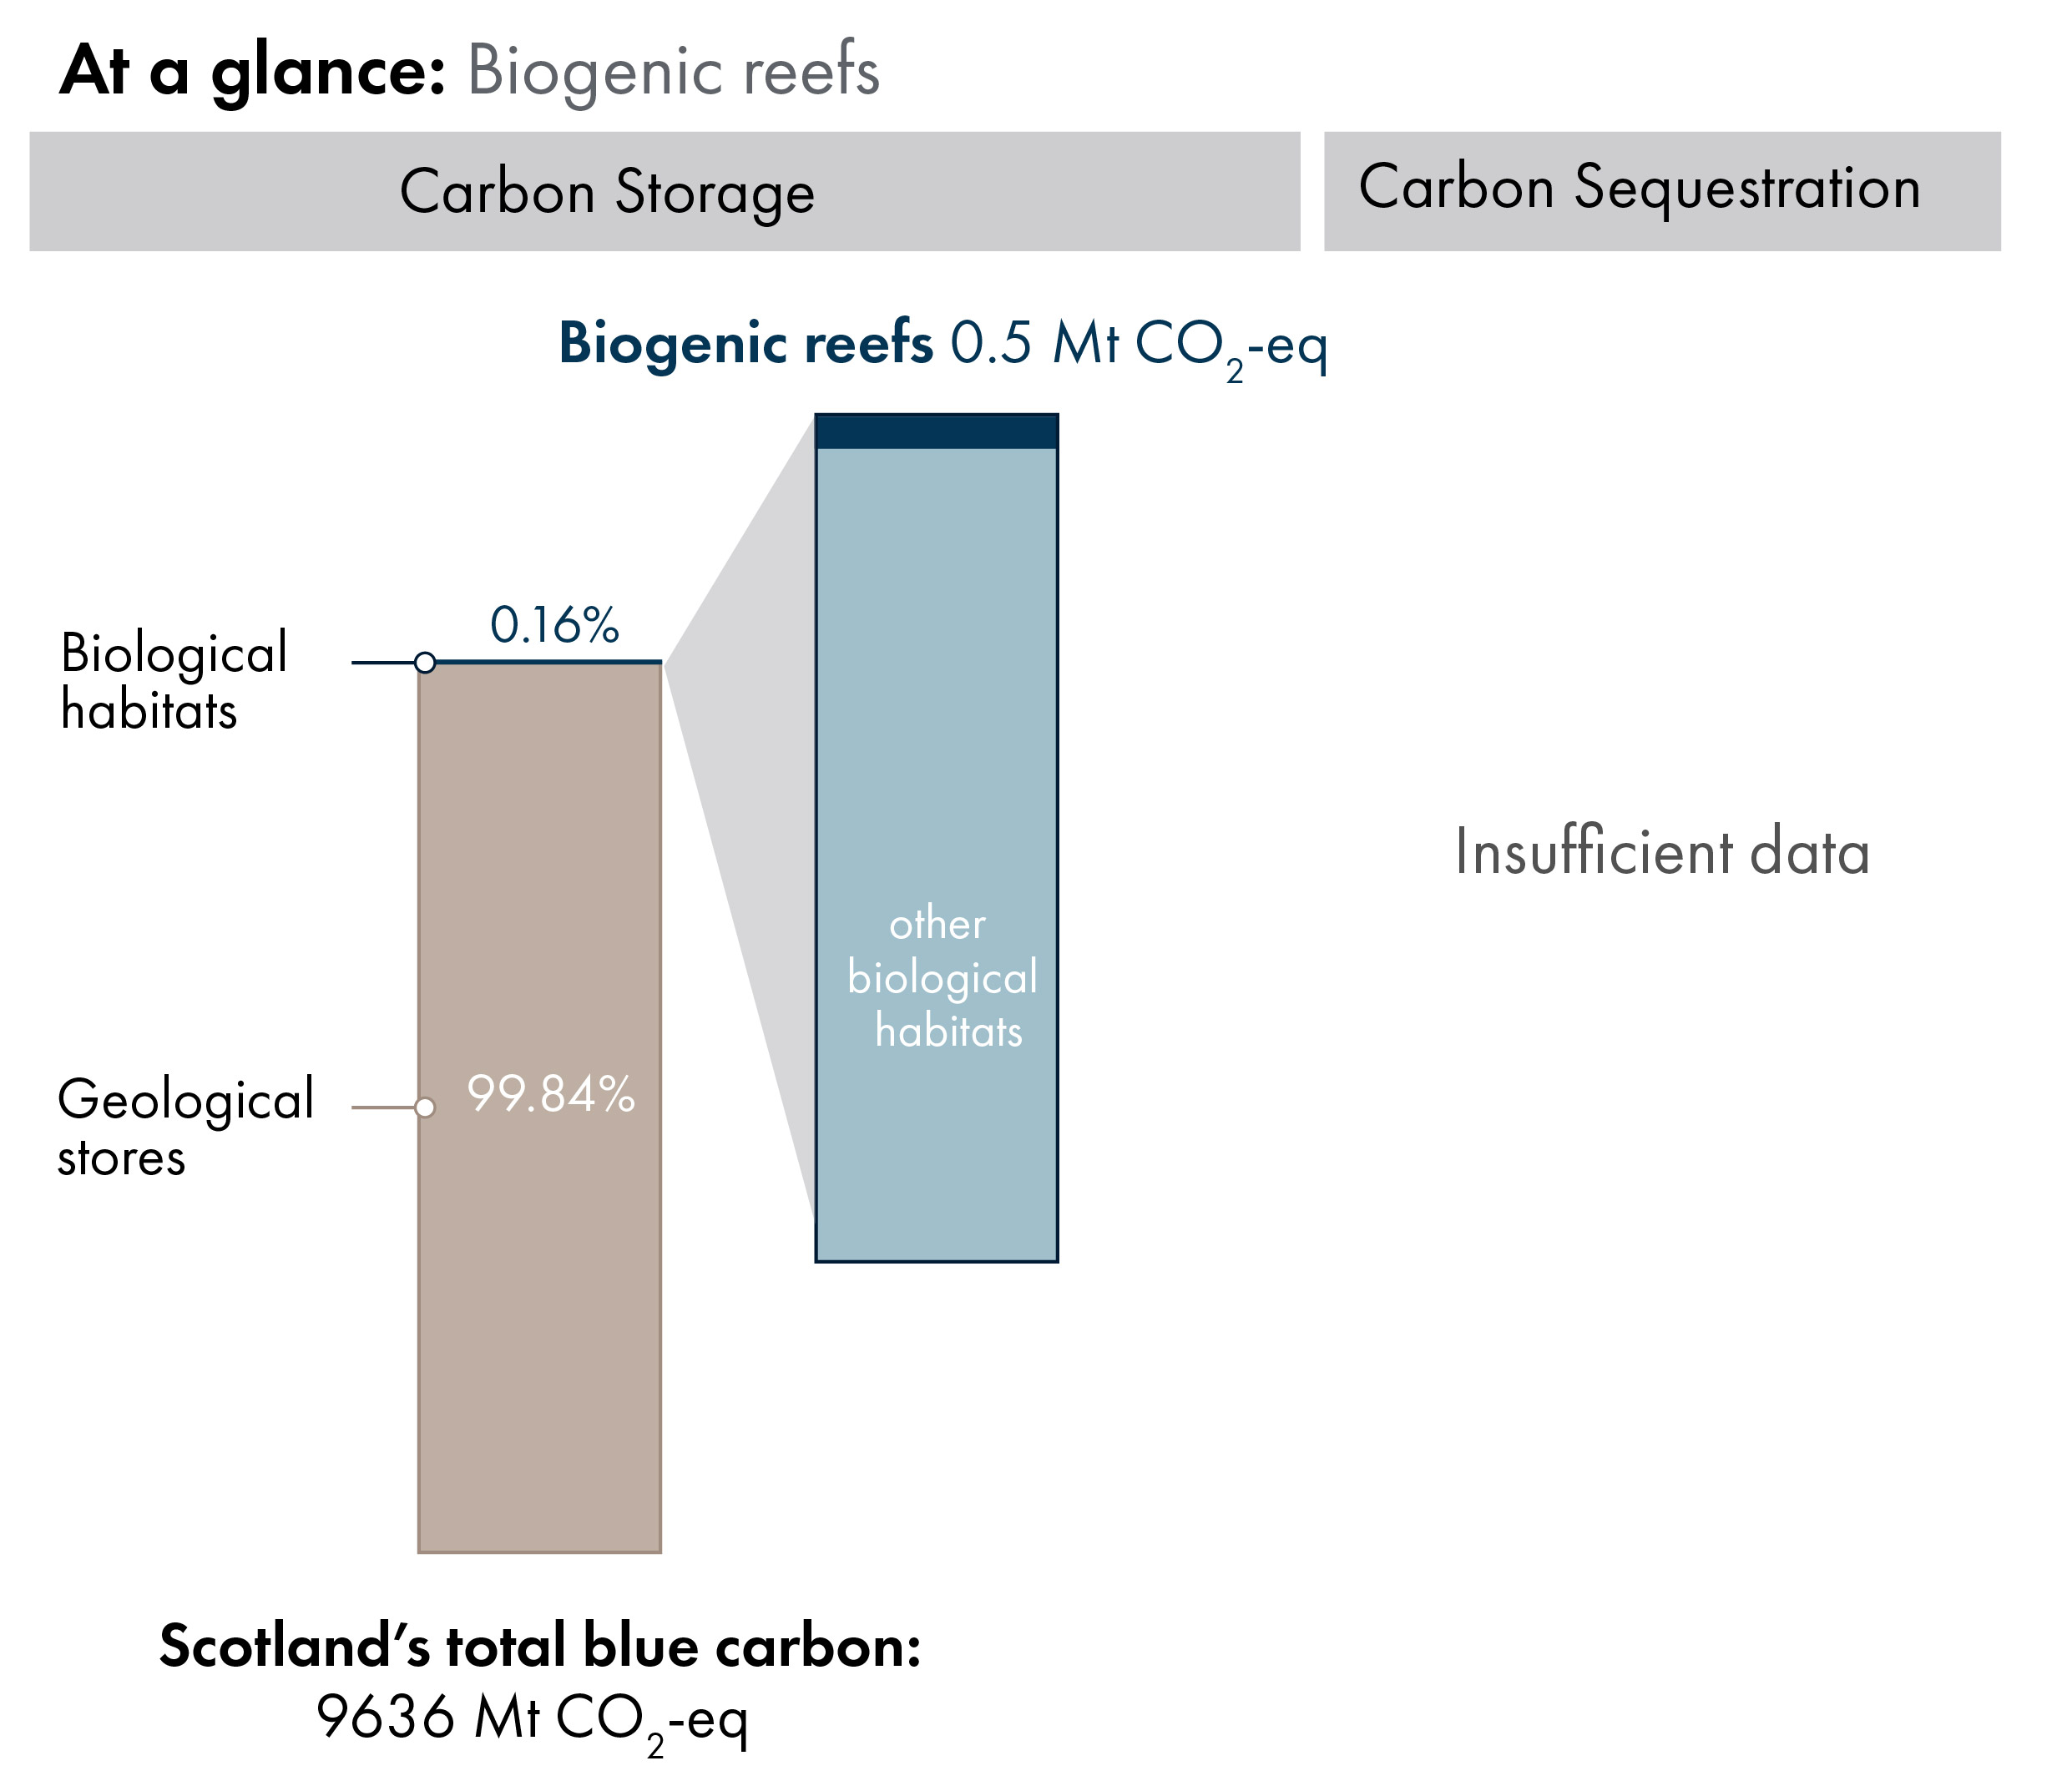 Bar charts showing the proportion of Scotland's blue carbon which is in geological stores (99.84%) versus carbon in biological habitats and species (0.16%). Inset bar chart shows the proportion of carbon in biological habitats which is biogenic reef carbon storage (0.5 megatonnes of carbon dioxide equivalent).